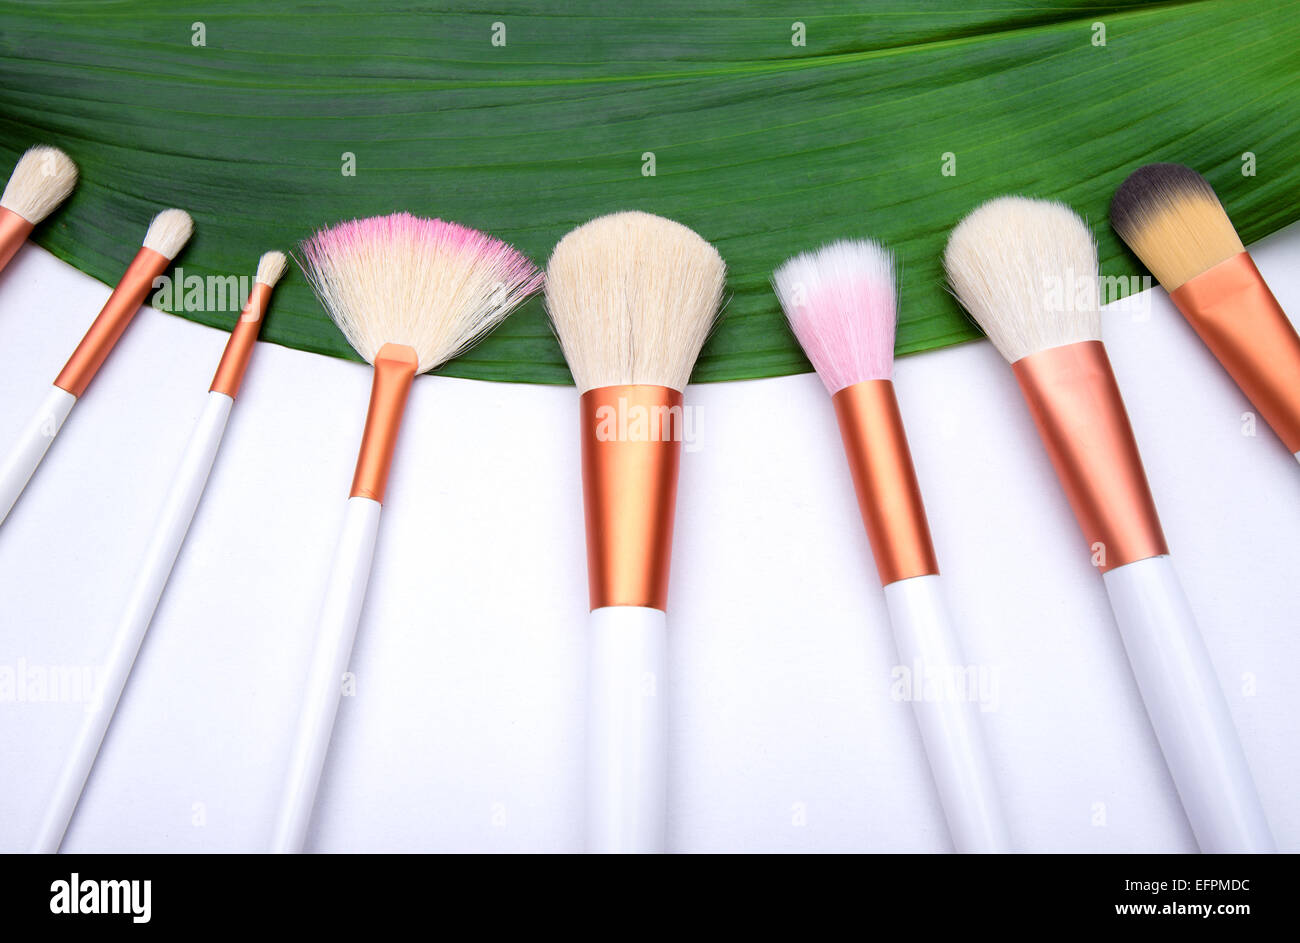 Makeup Brushes on green leaf Stock Photo